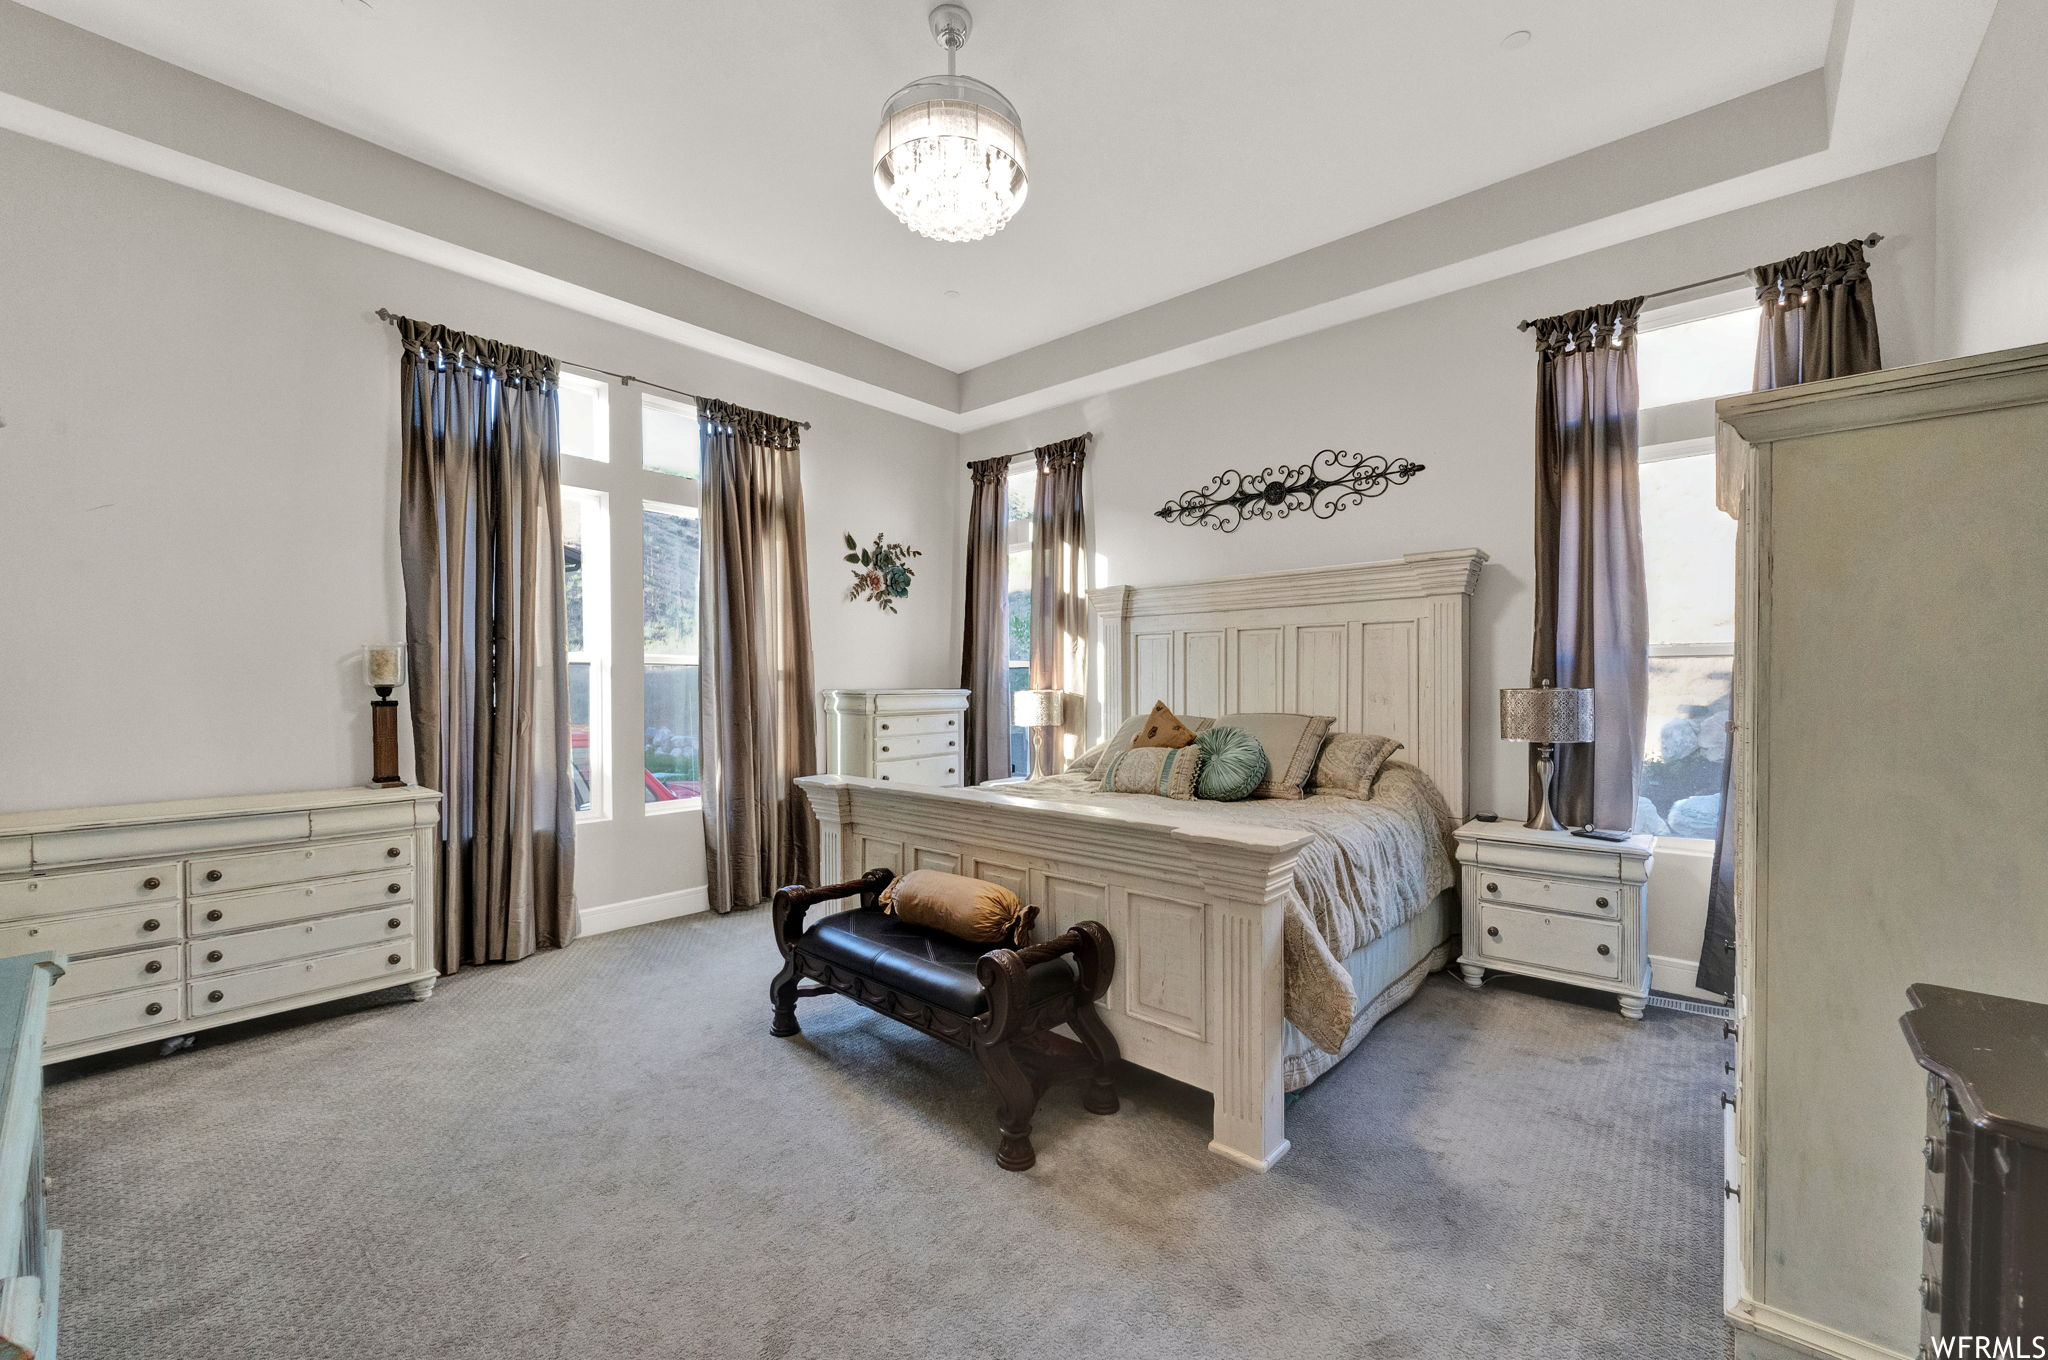 Carpeted bedroom featuring multiple windows and a raised ceiling